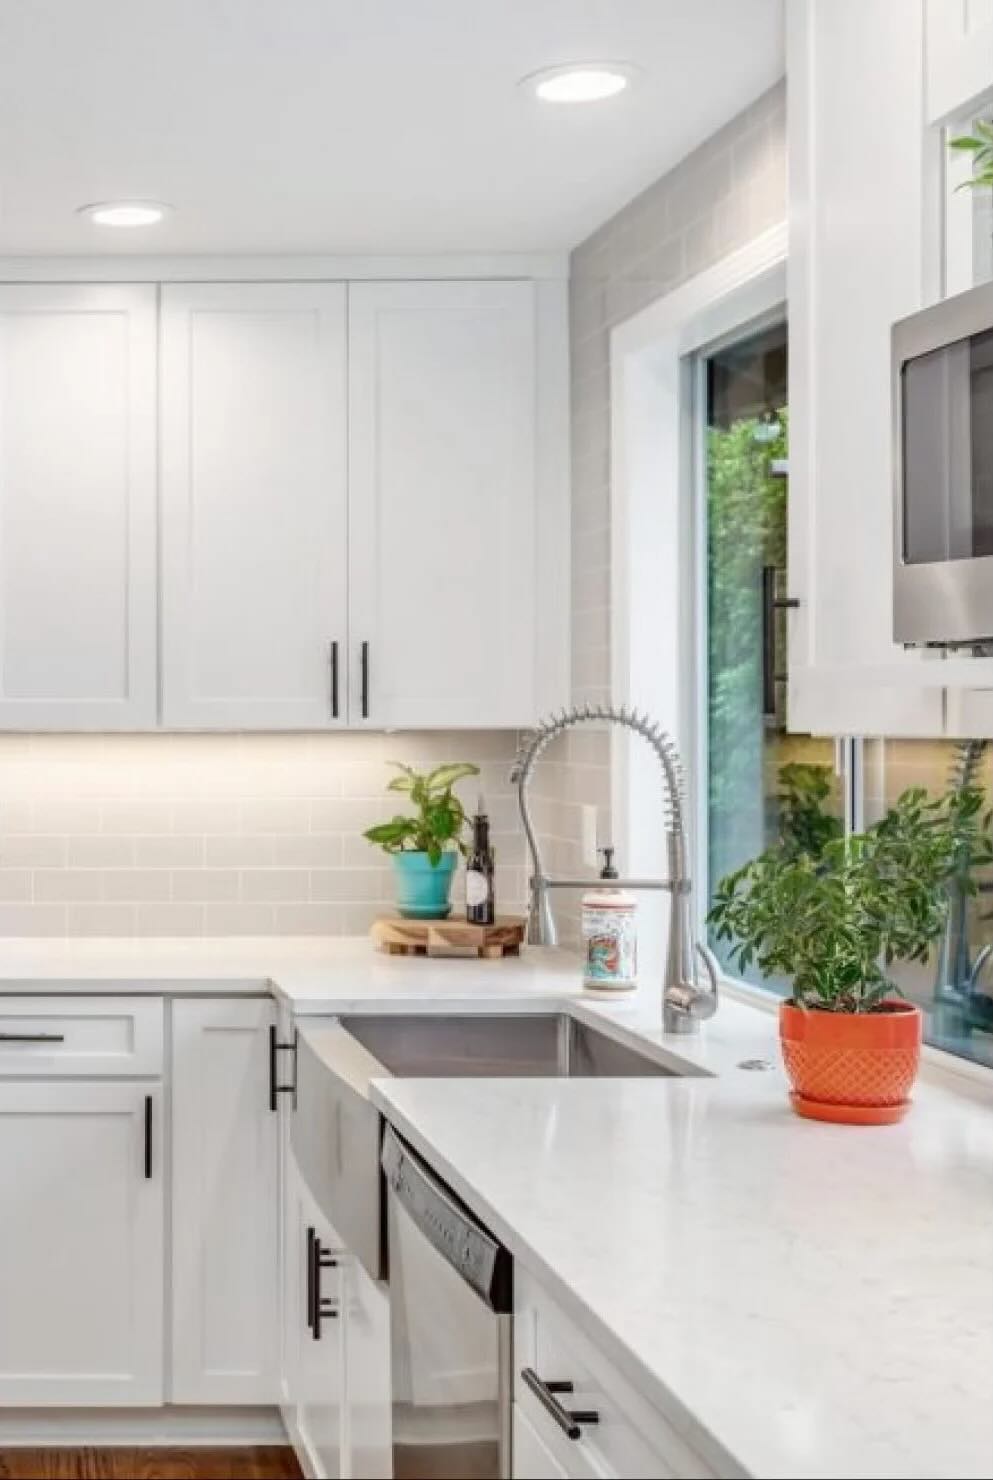 How to Protect Your Home During a Kitchen Remodel